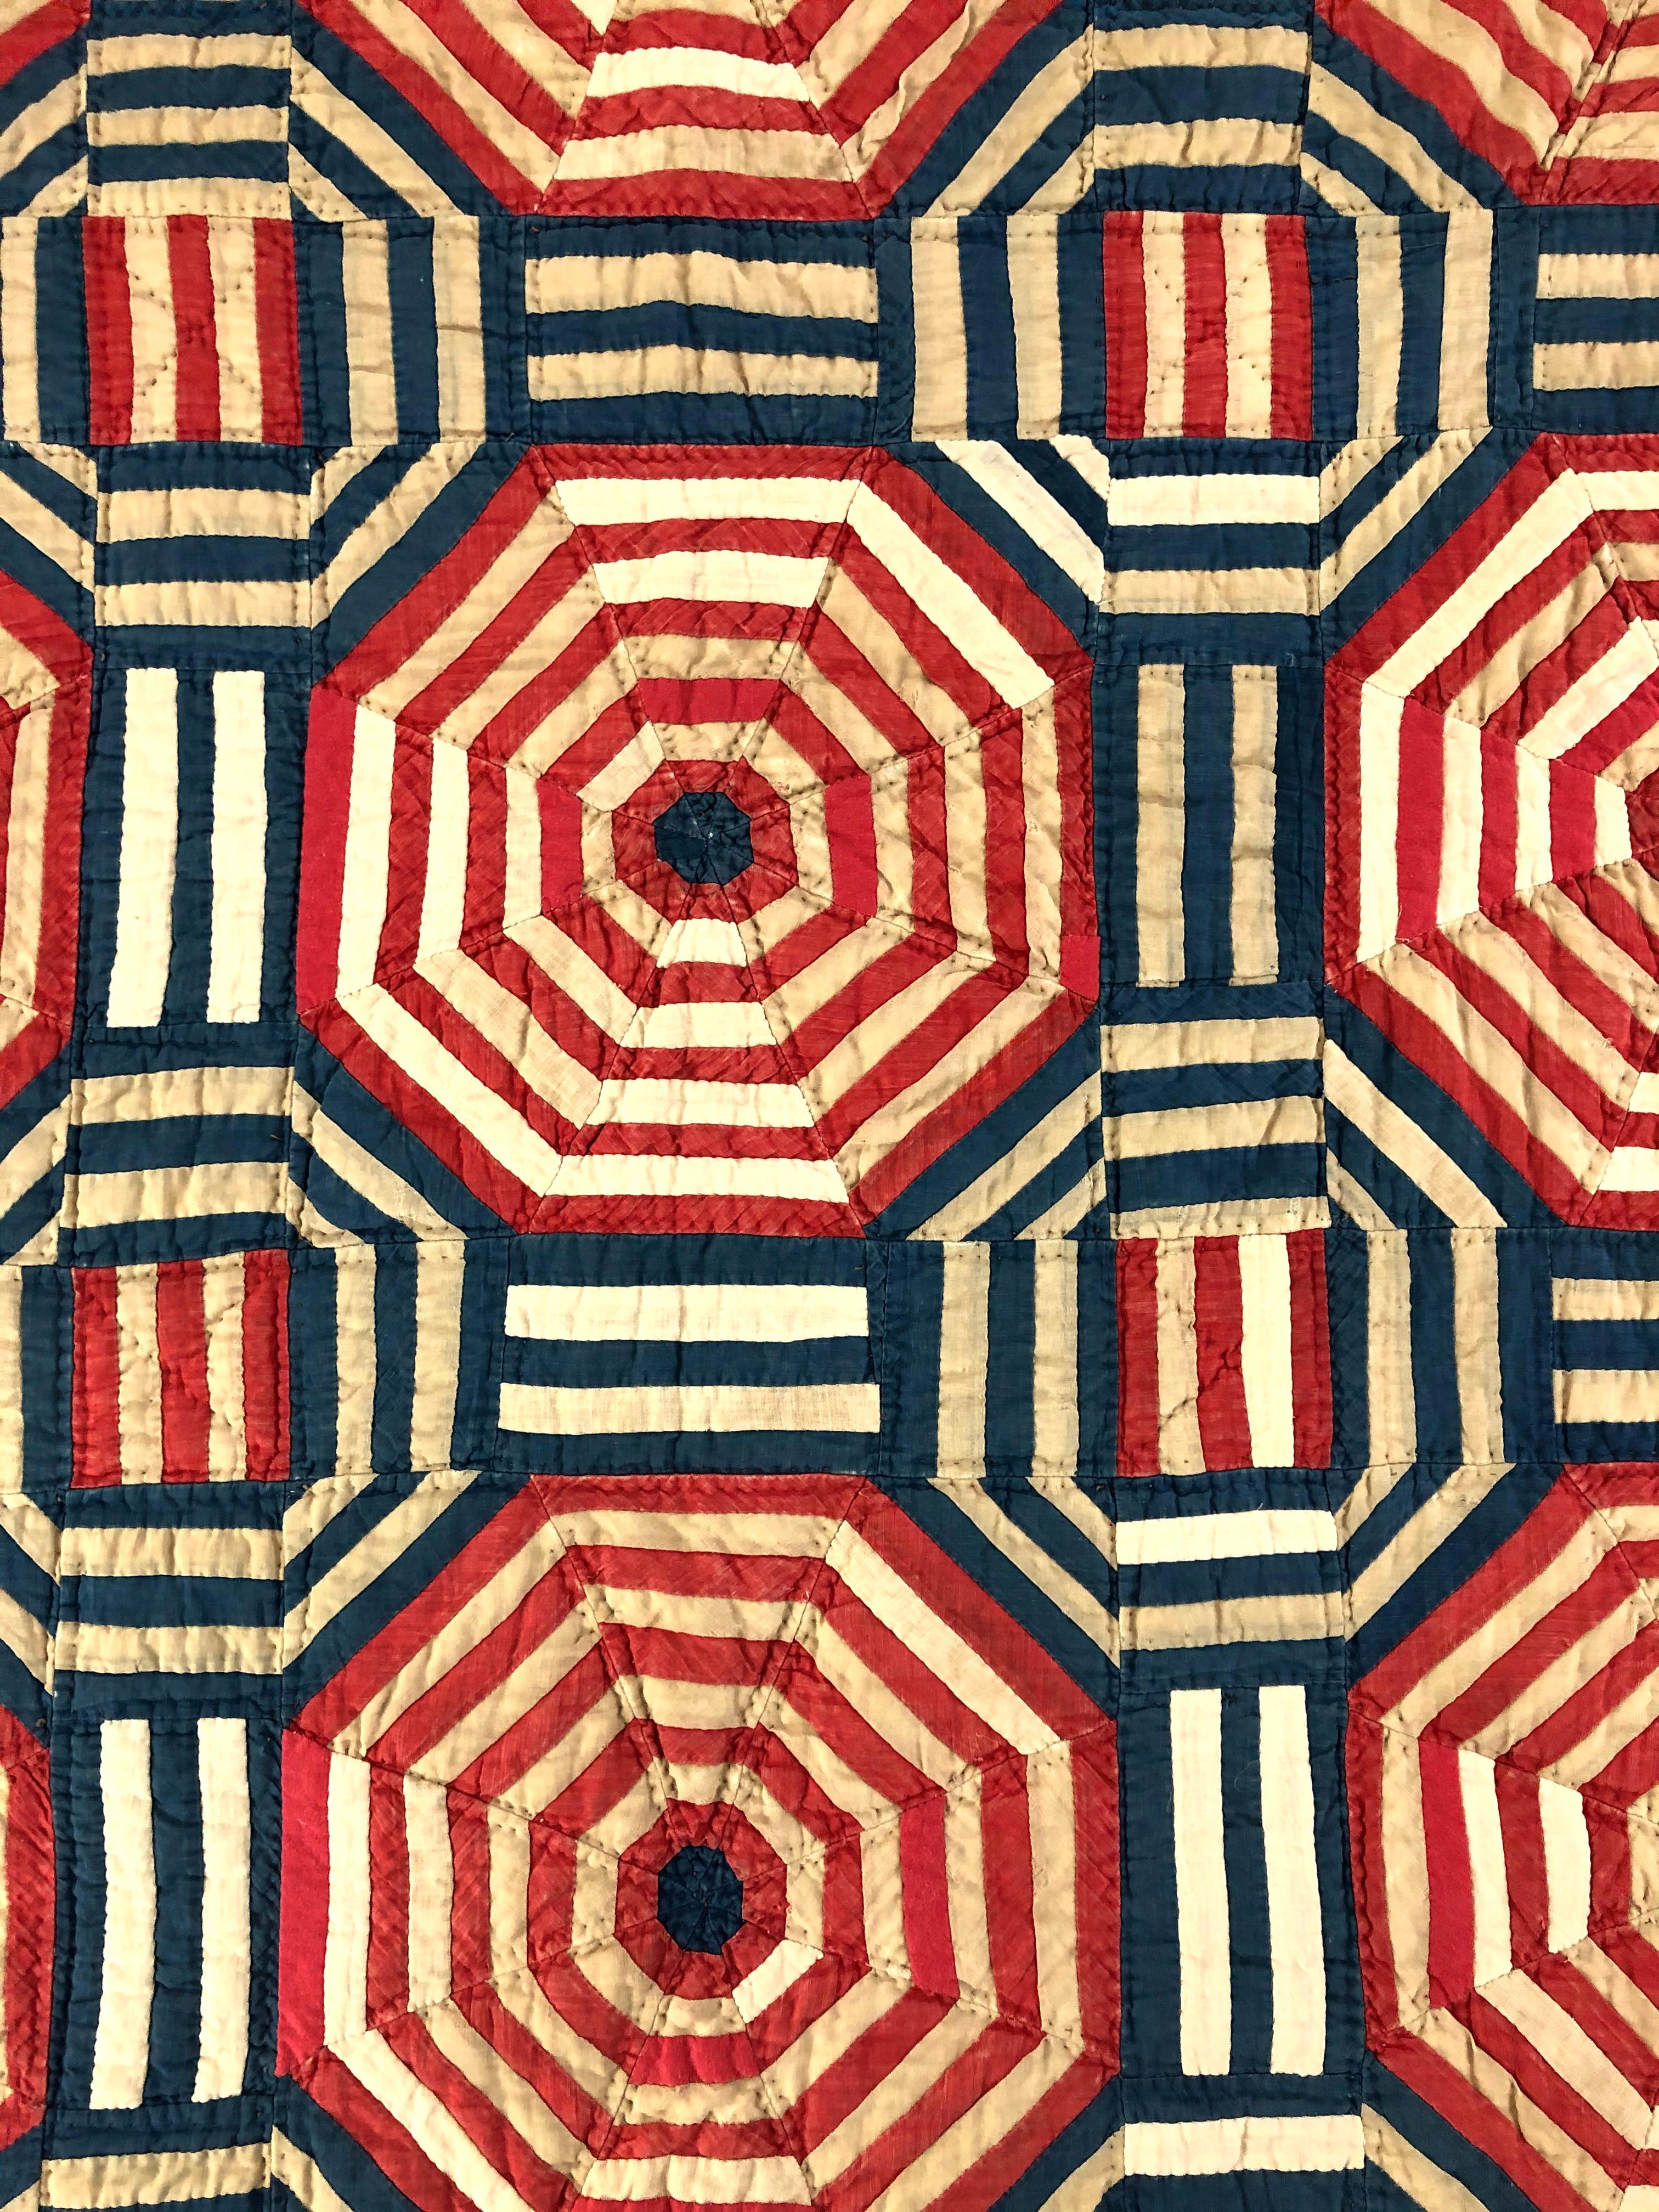 A strikingly graphic American Folk Art crib quilt wall hanging, in red, white and blue, composed of three rows of red and white striped hexagons interspersed with blue and white hexagons and red and white stripes, evocative of a modern Sol LeWitt or